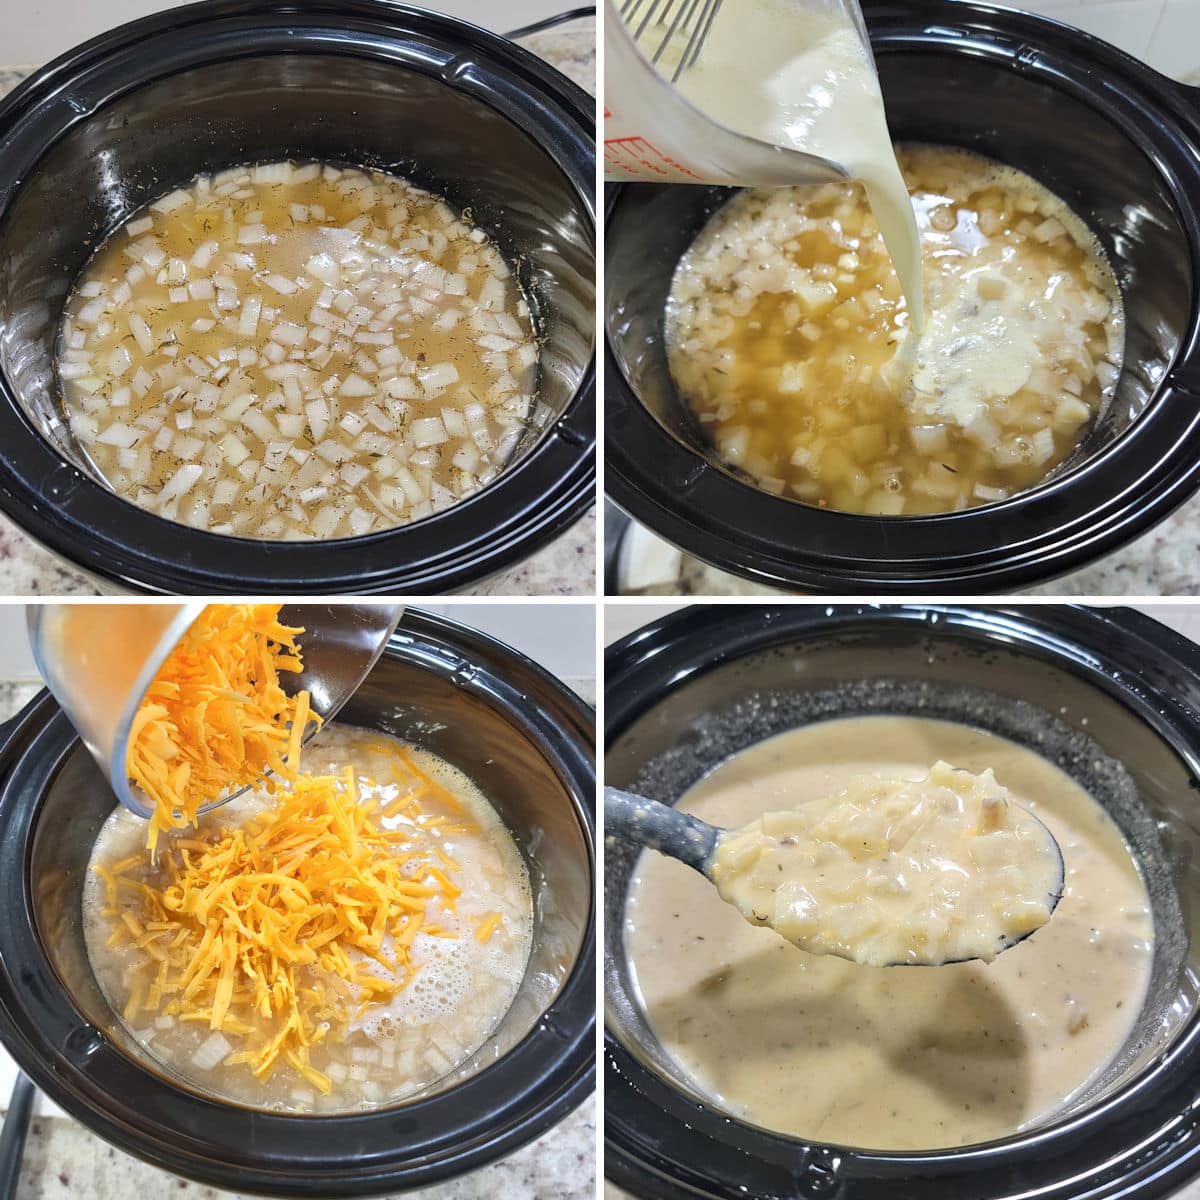 Making potato soup in a slow cooker.